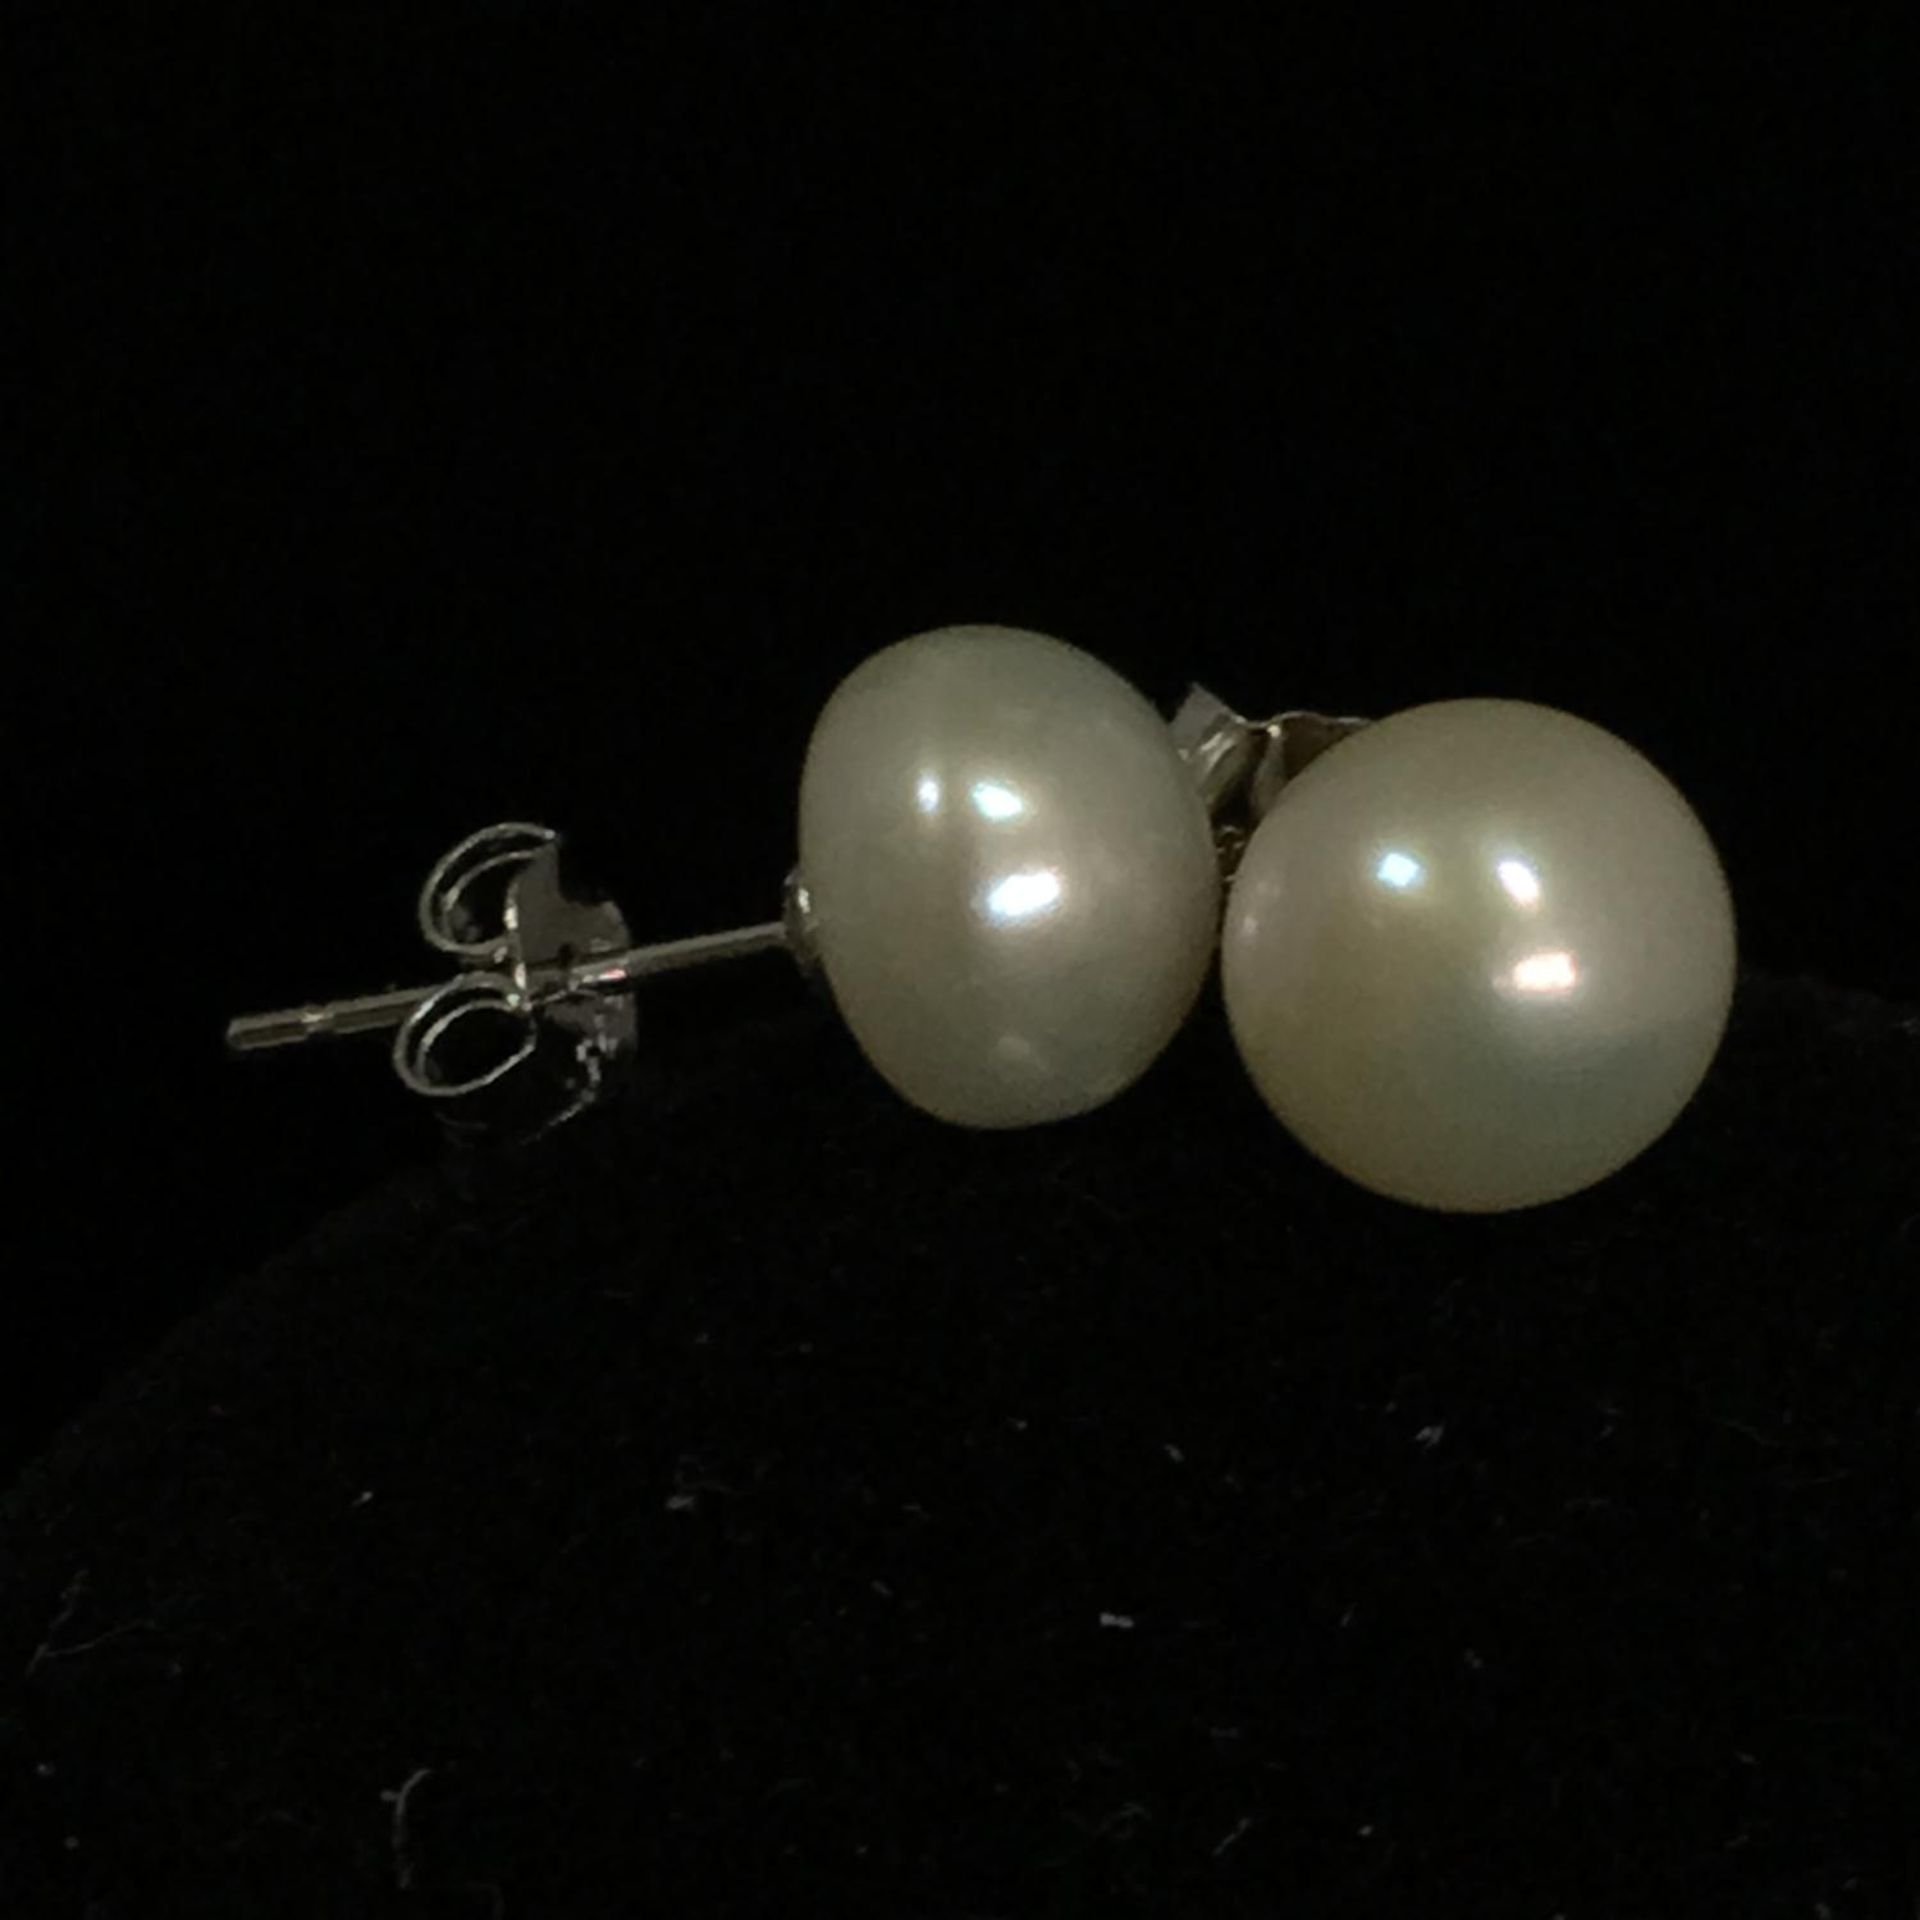 7mm freshwater white pearl stud earrings on 925 silver. Includes free UK delivery.